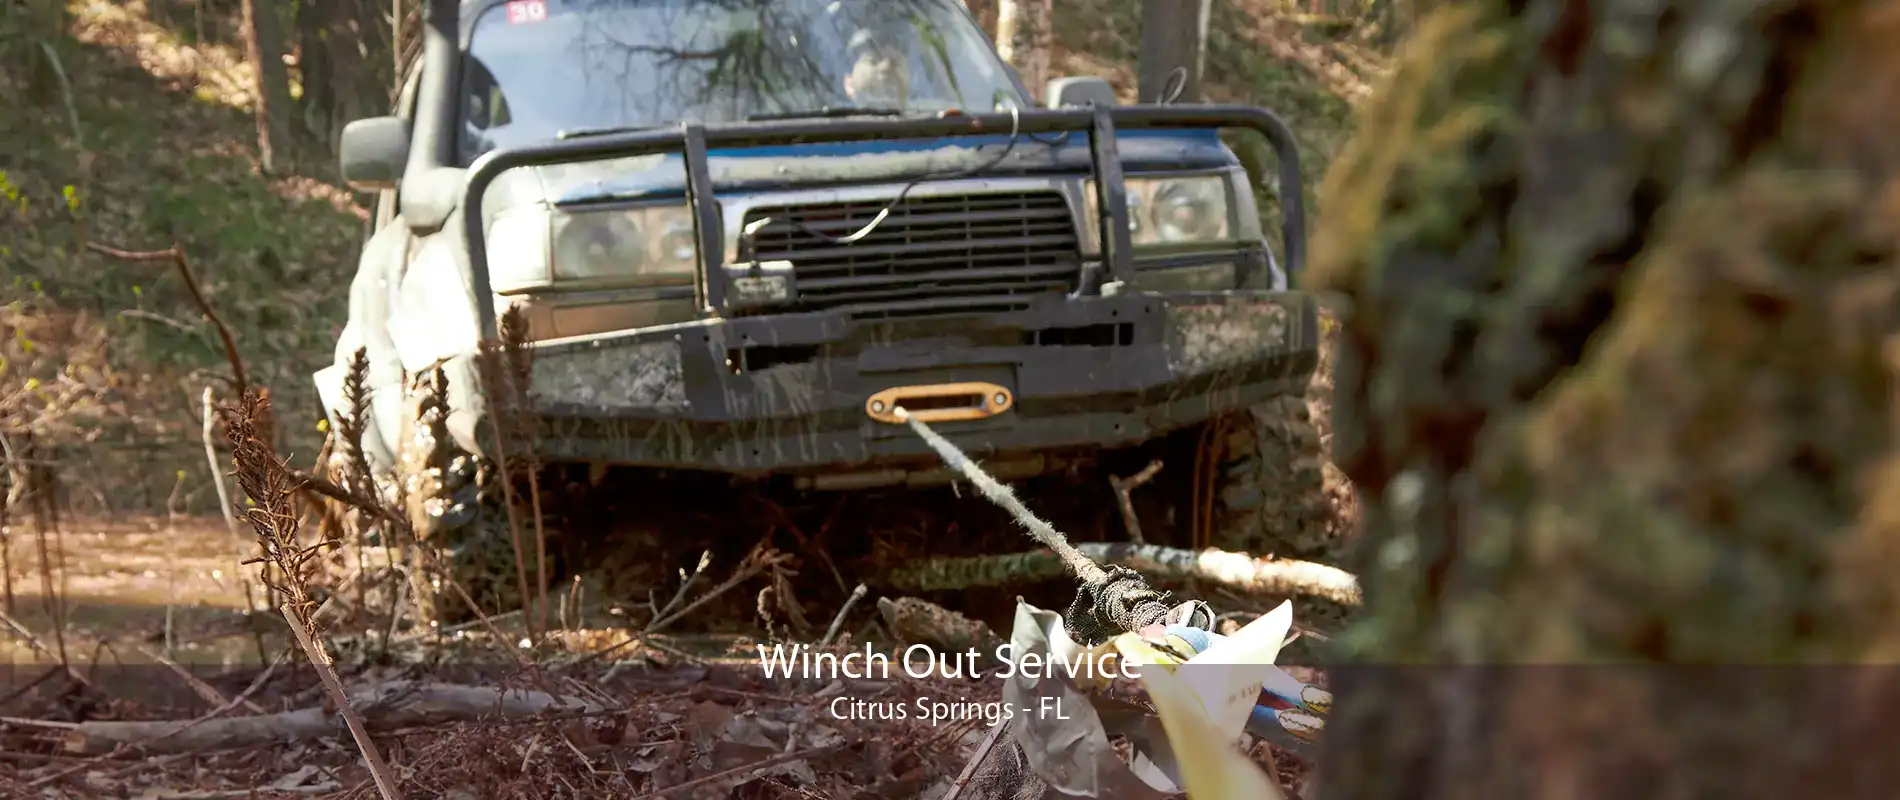 Winch Out Service Citrus Springs - FL